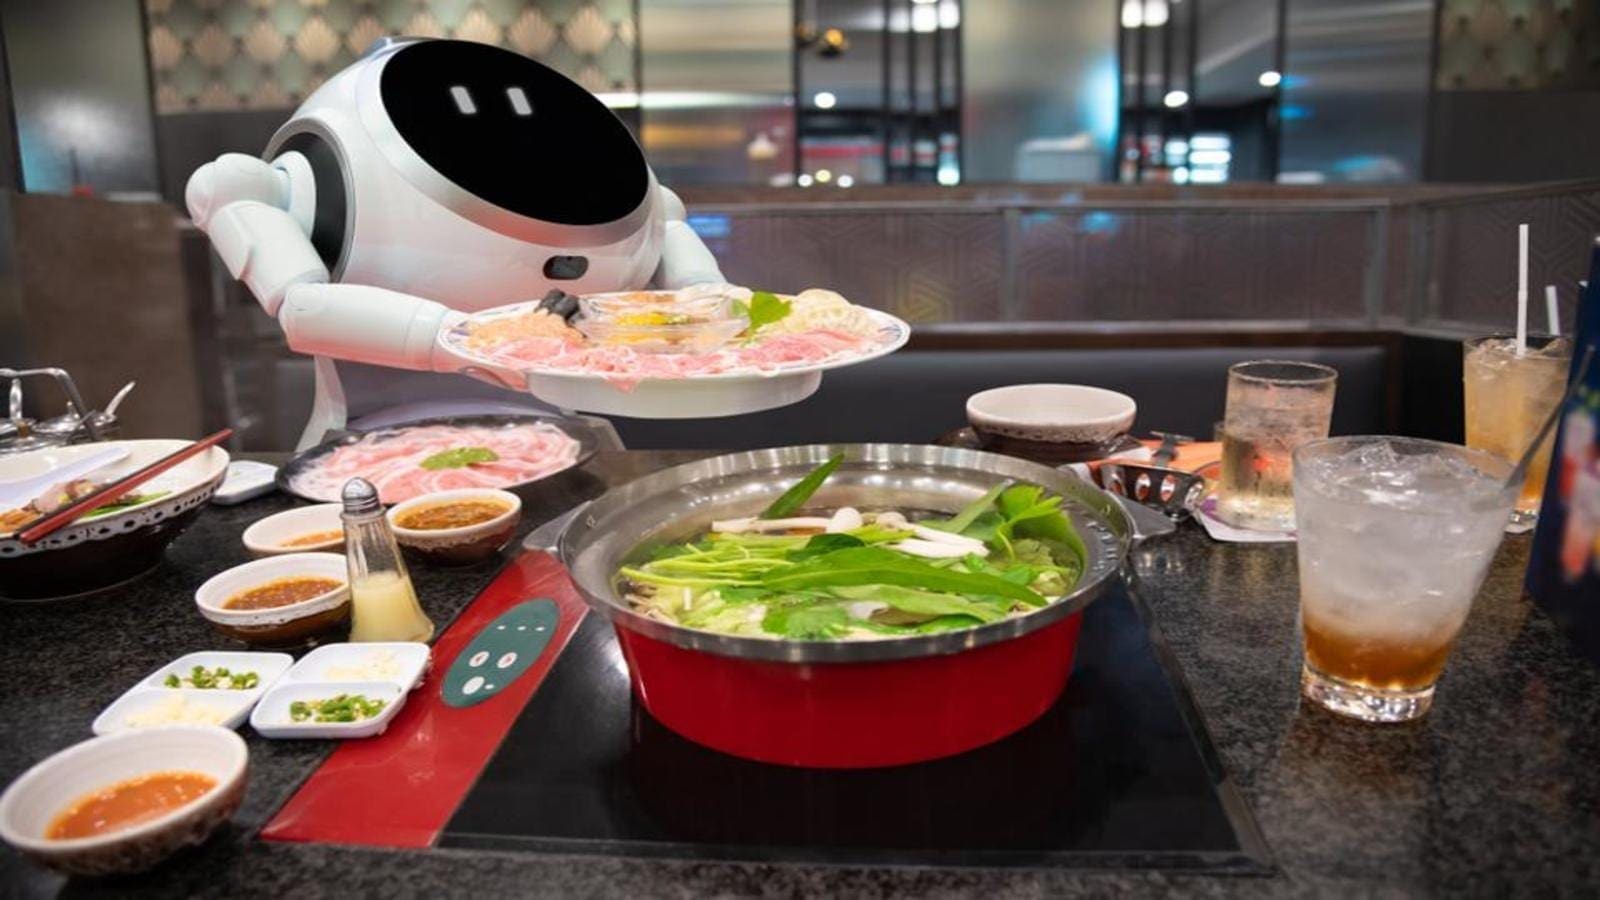 New era in the food industry as World’s first AI-based robotic restaurant opens in the US state of Illinois